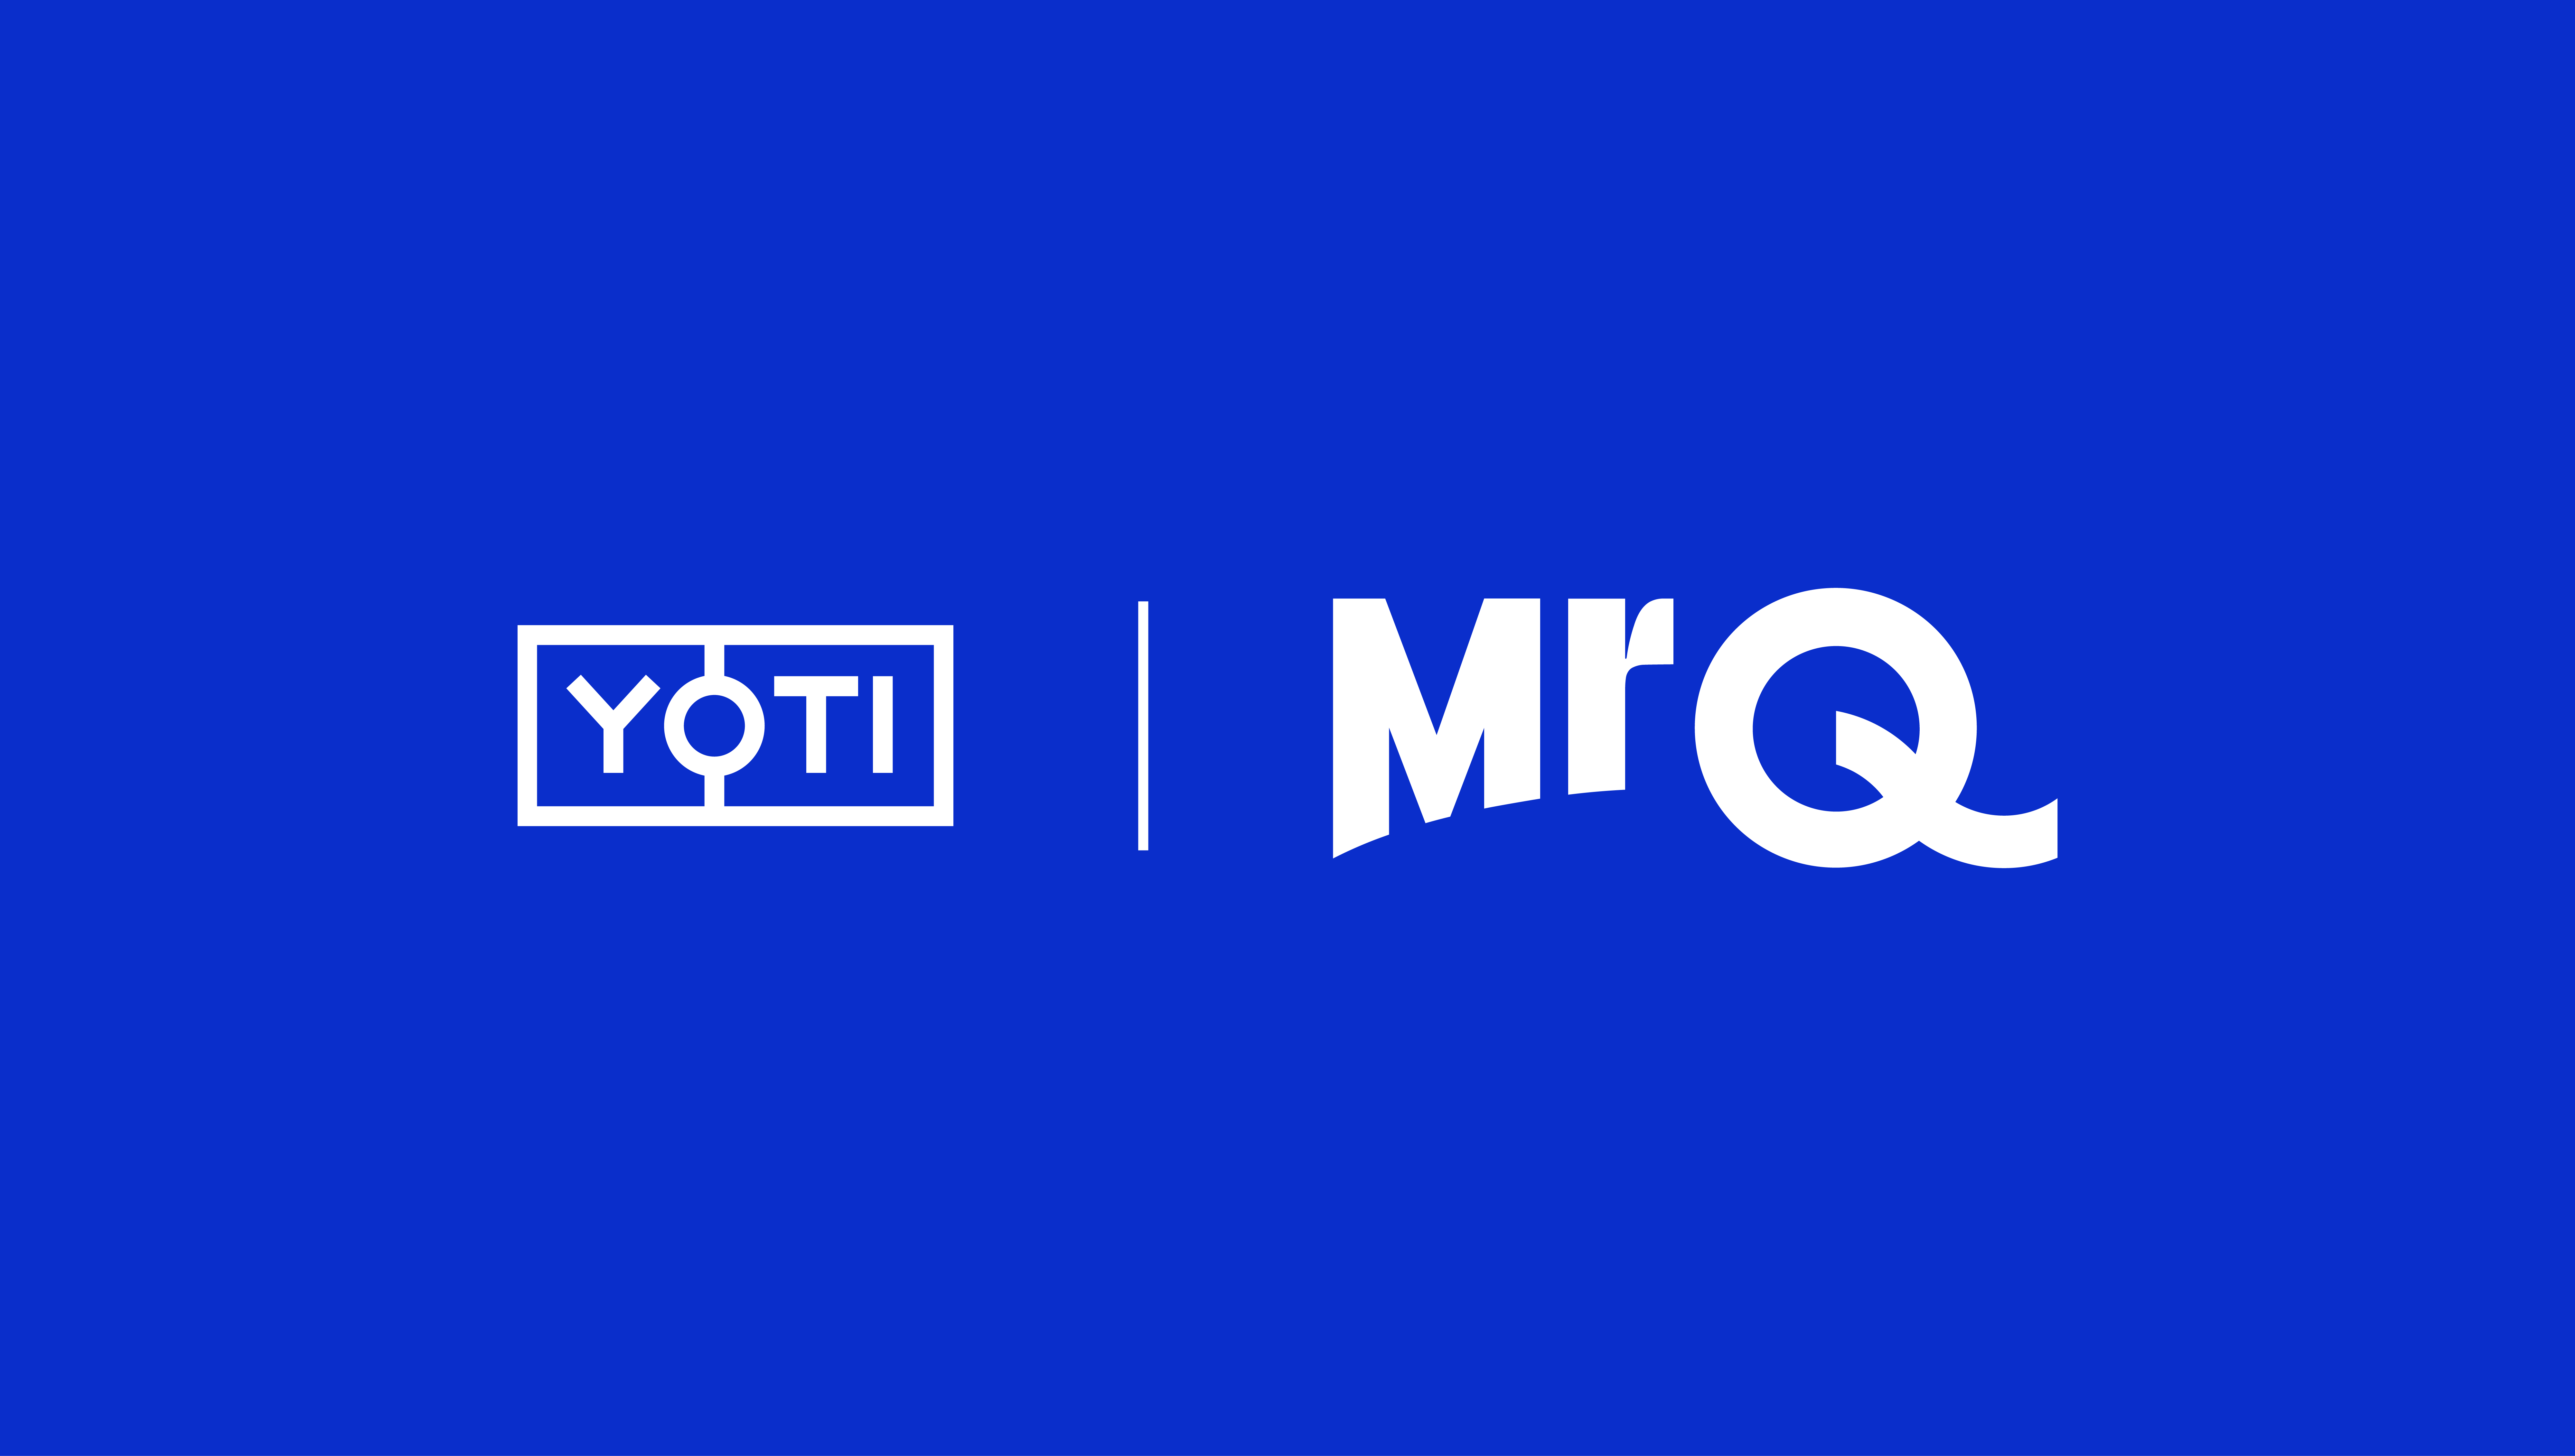 Yoti and MrQ logos presented together